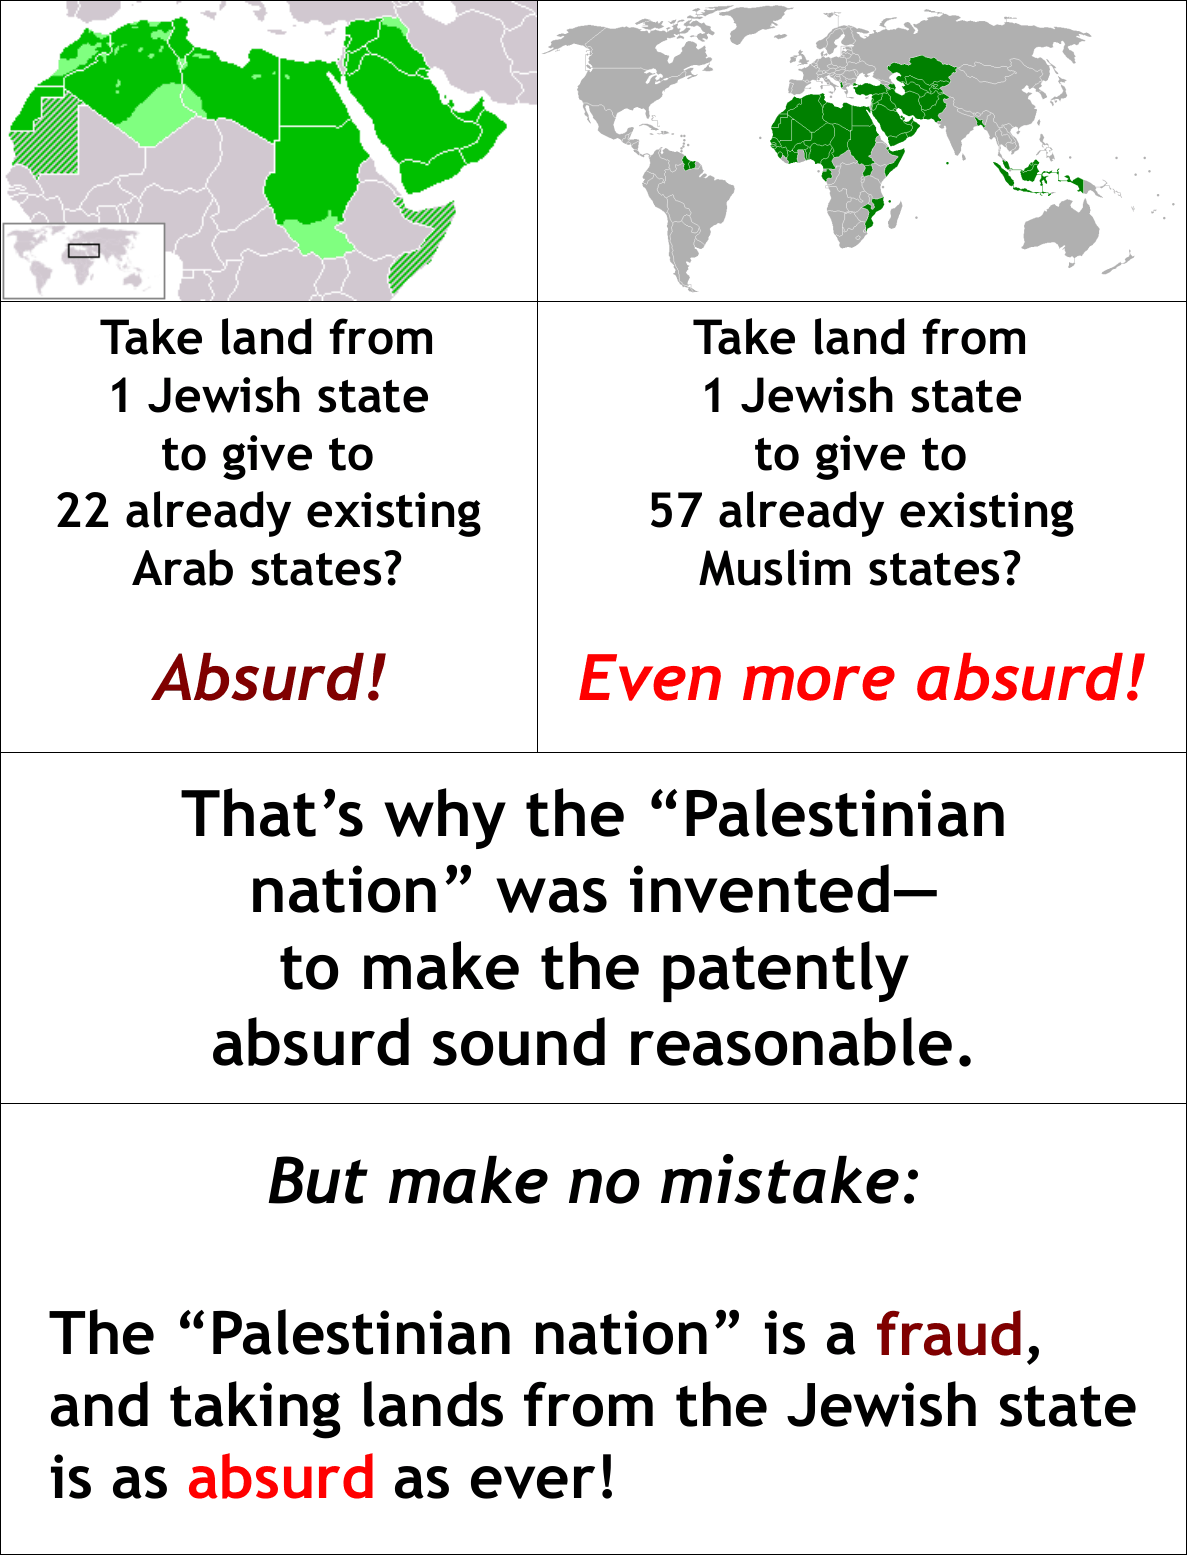 Map: Showing how the "Palestinian nation" fraud is a cover-up for the obvious absurdity of taking lands from the Jewish state to give them to the 22 Arab or 57 Muslim ones